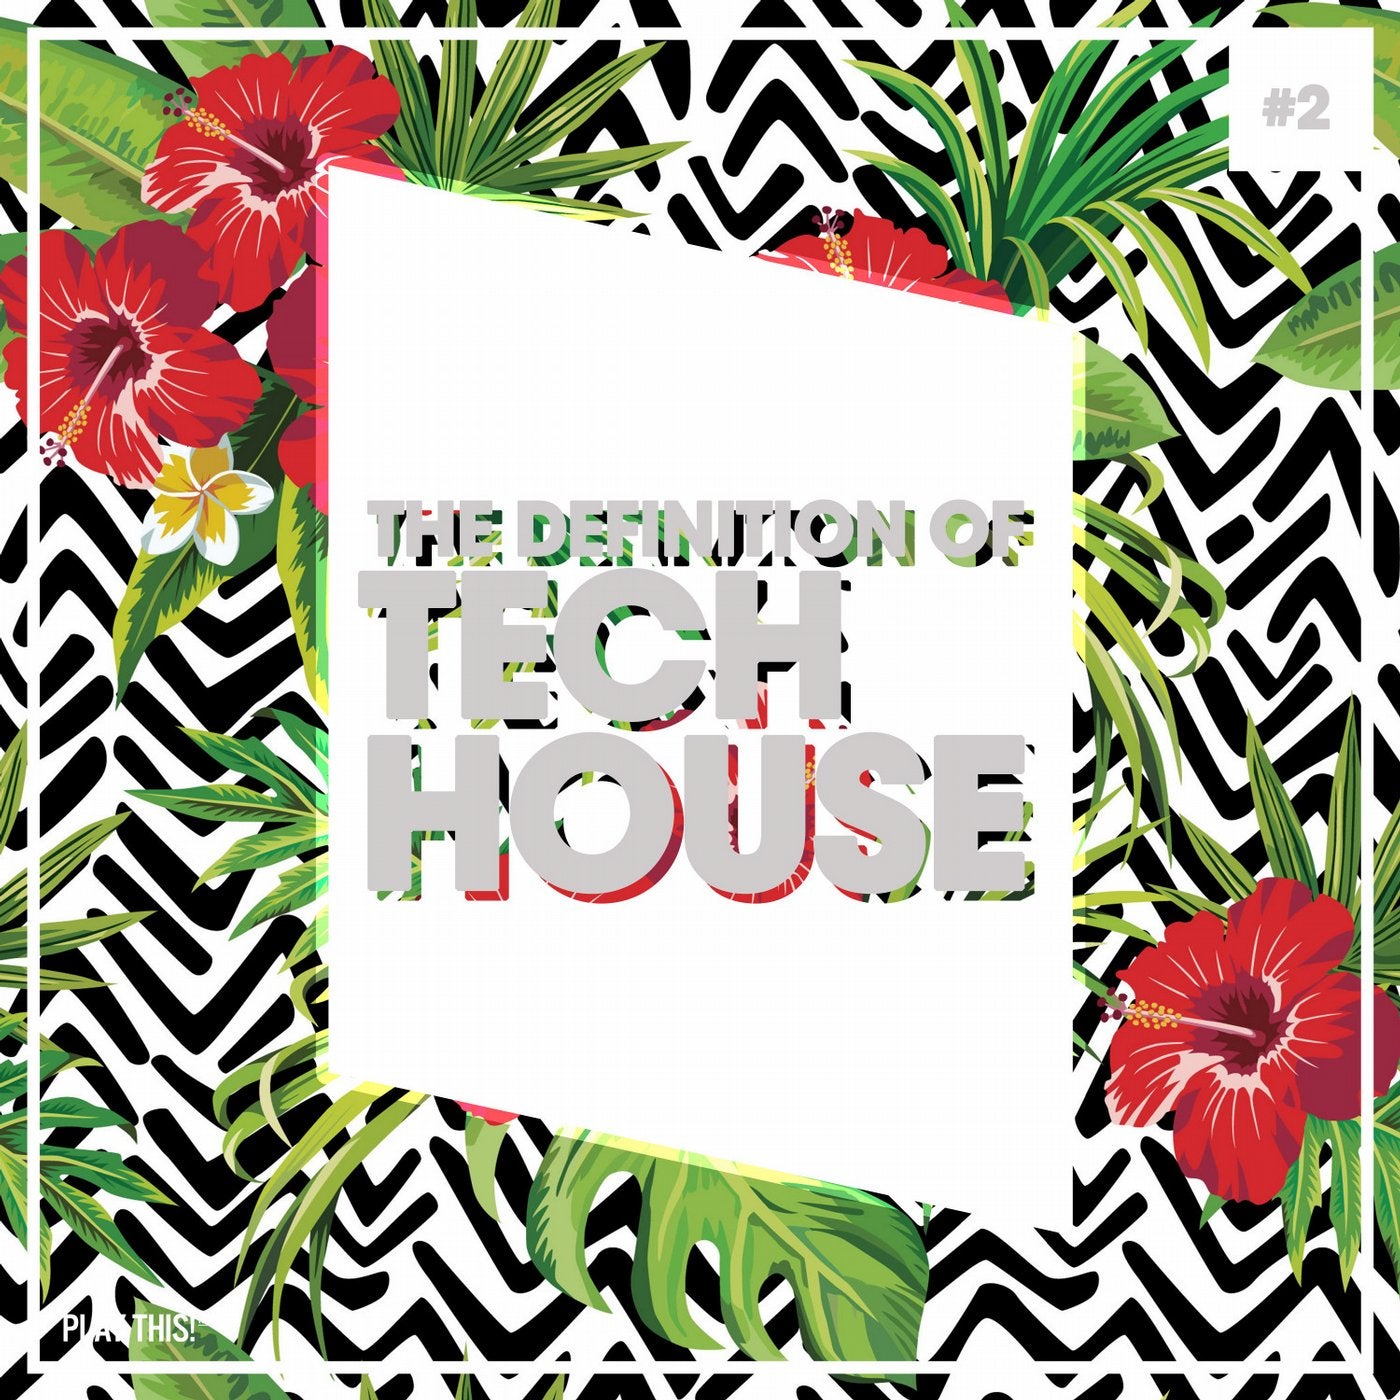 The Definition Of Tech House, Vol. 2